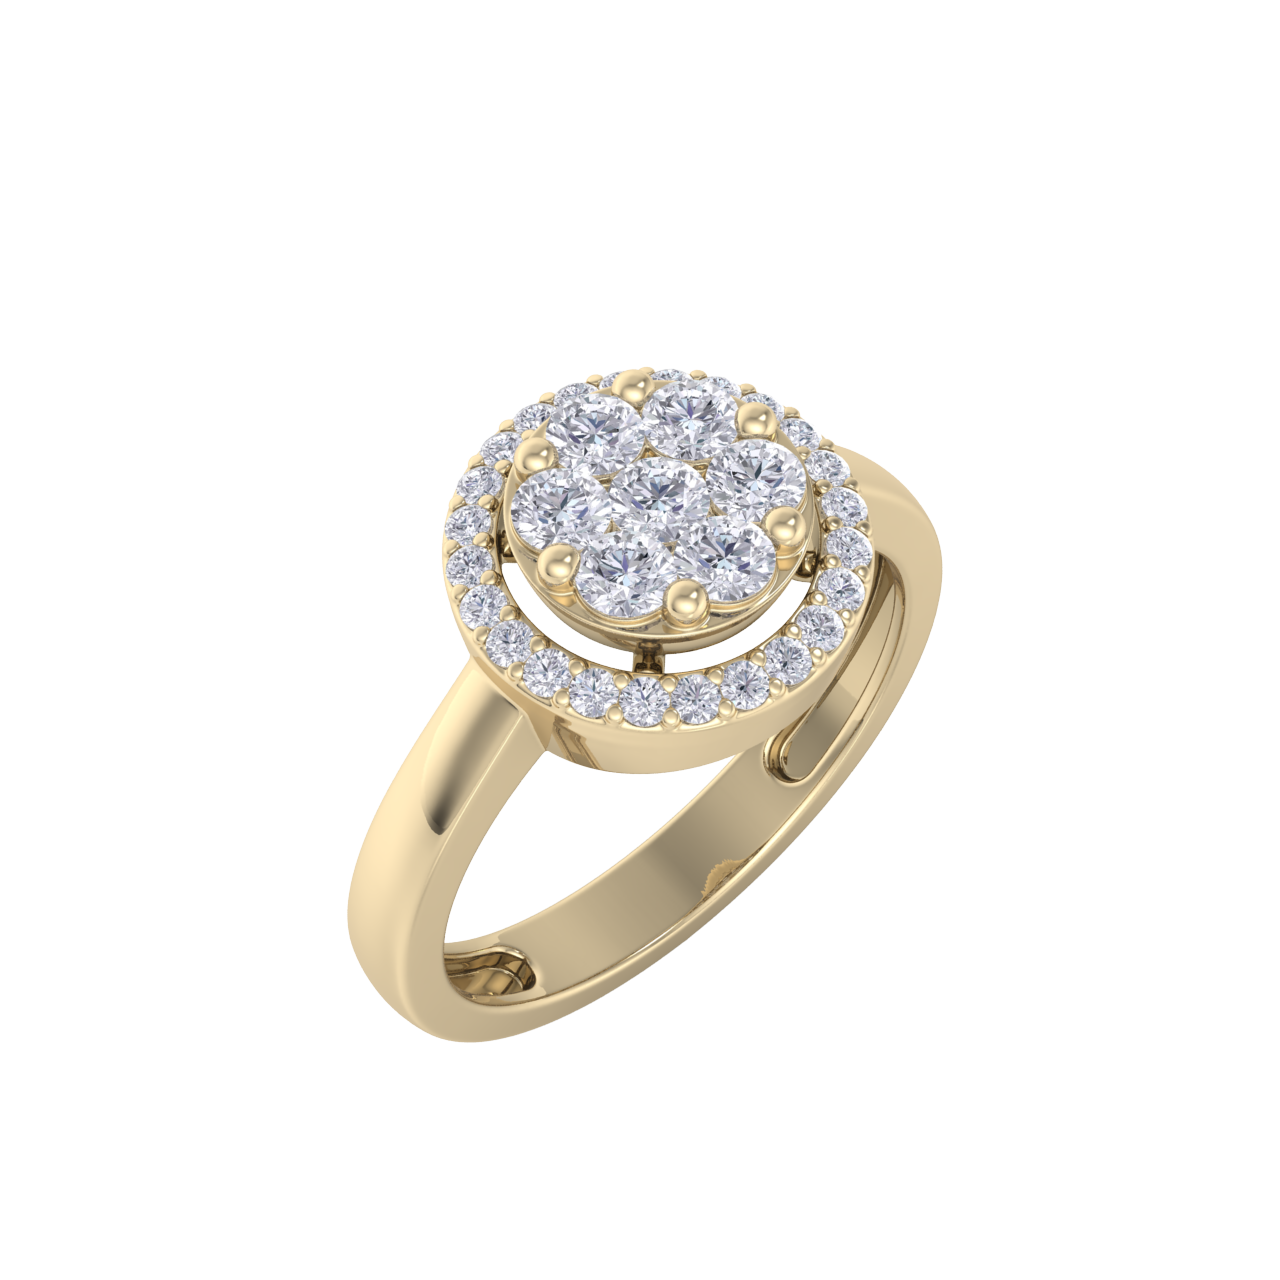 Halo illusion ring in yellow gold with white diamonds of 0.47 ct in weight